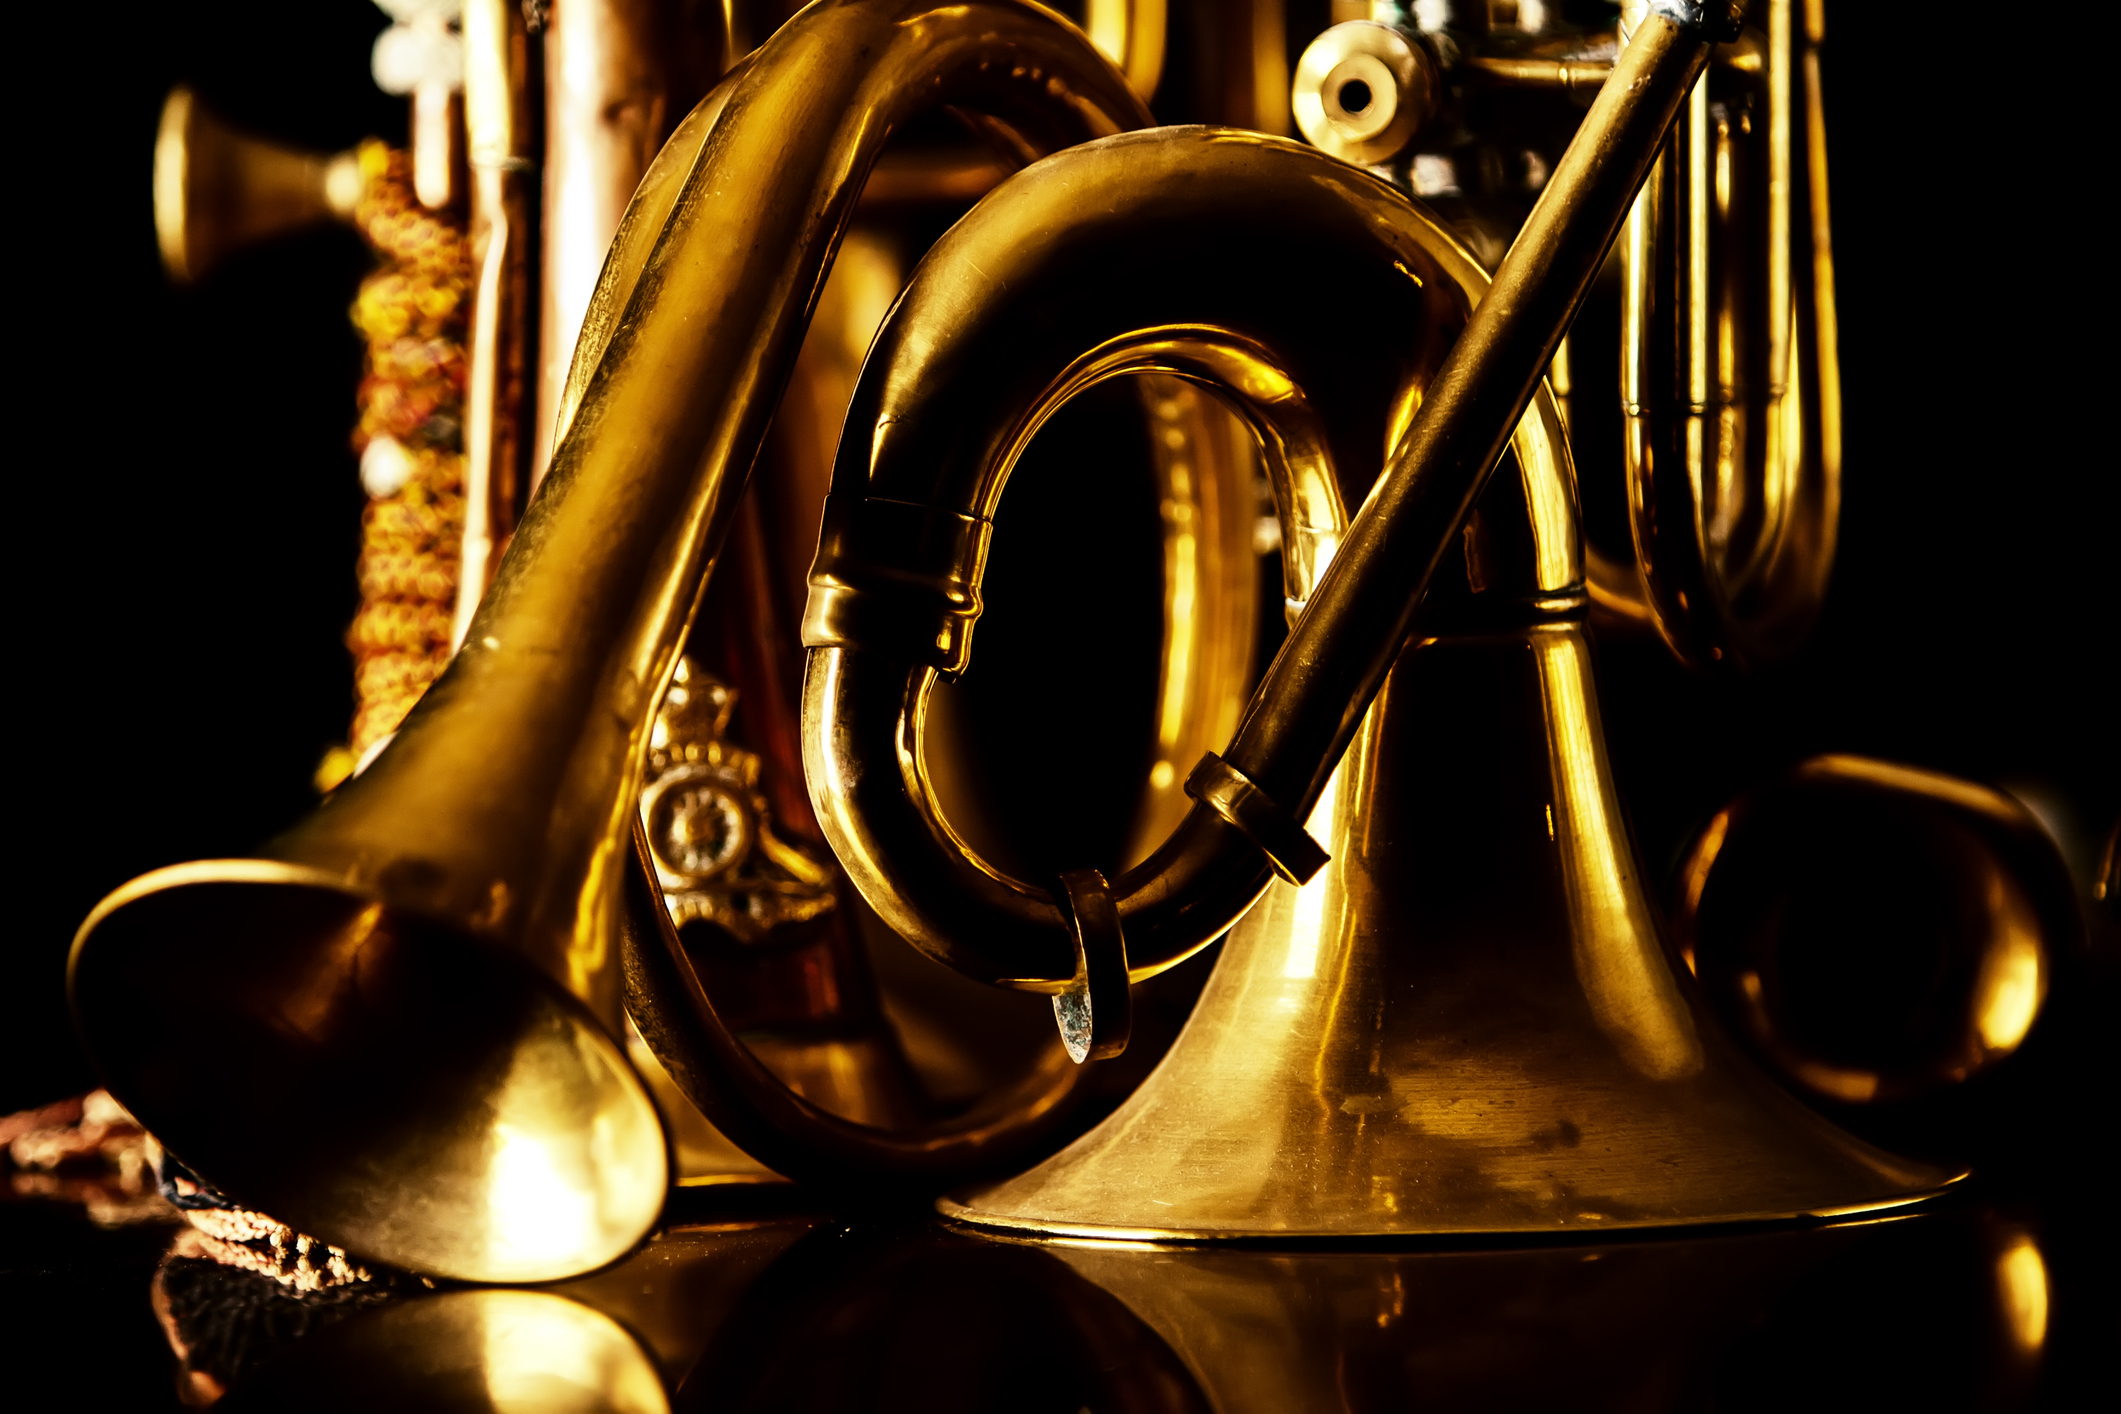 old-brass-instruments-old-crown-brass-band